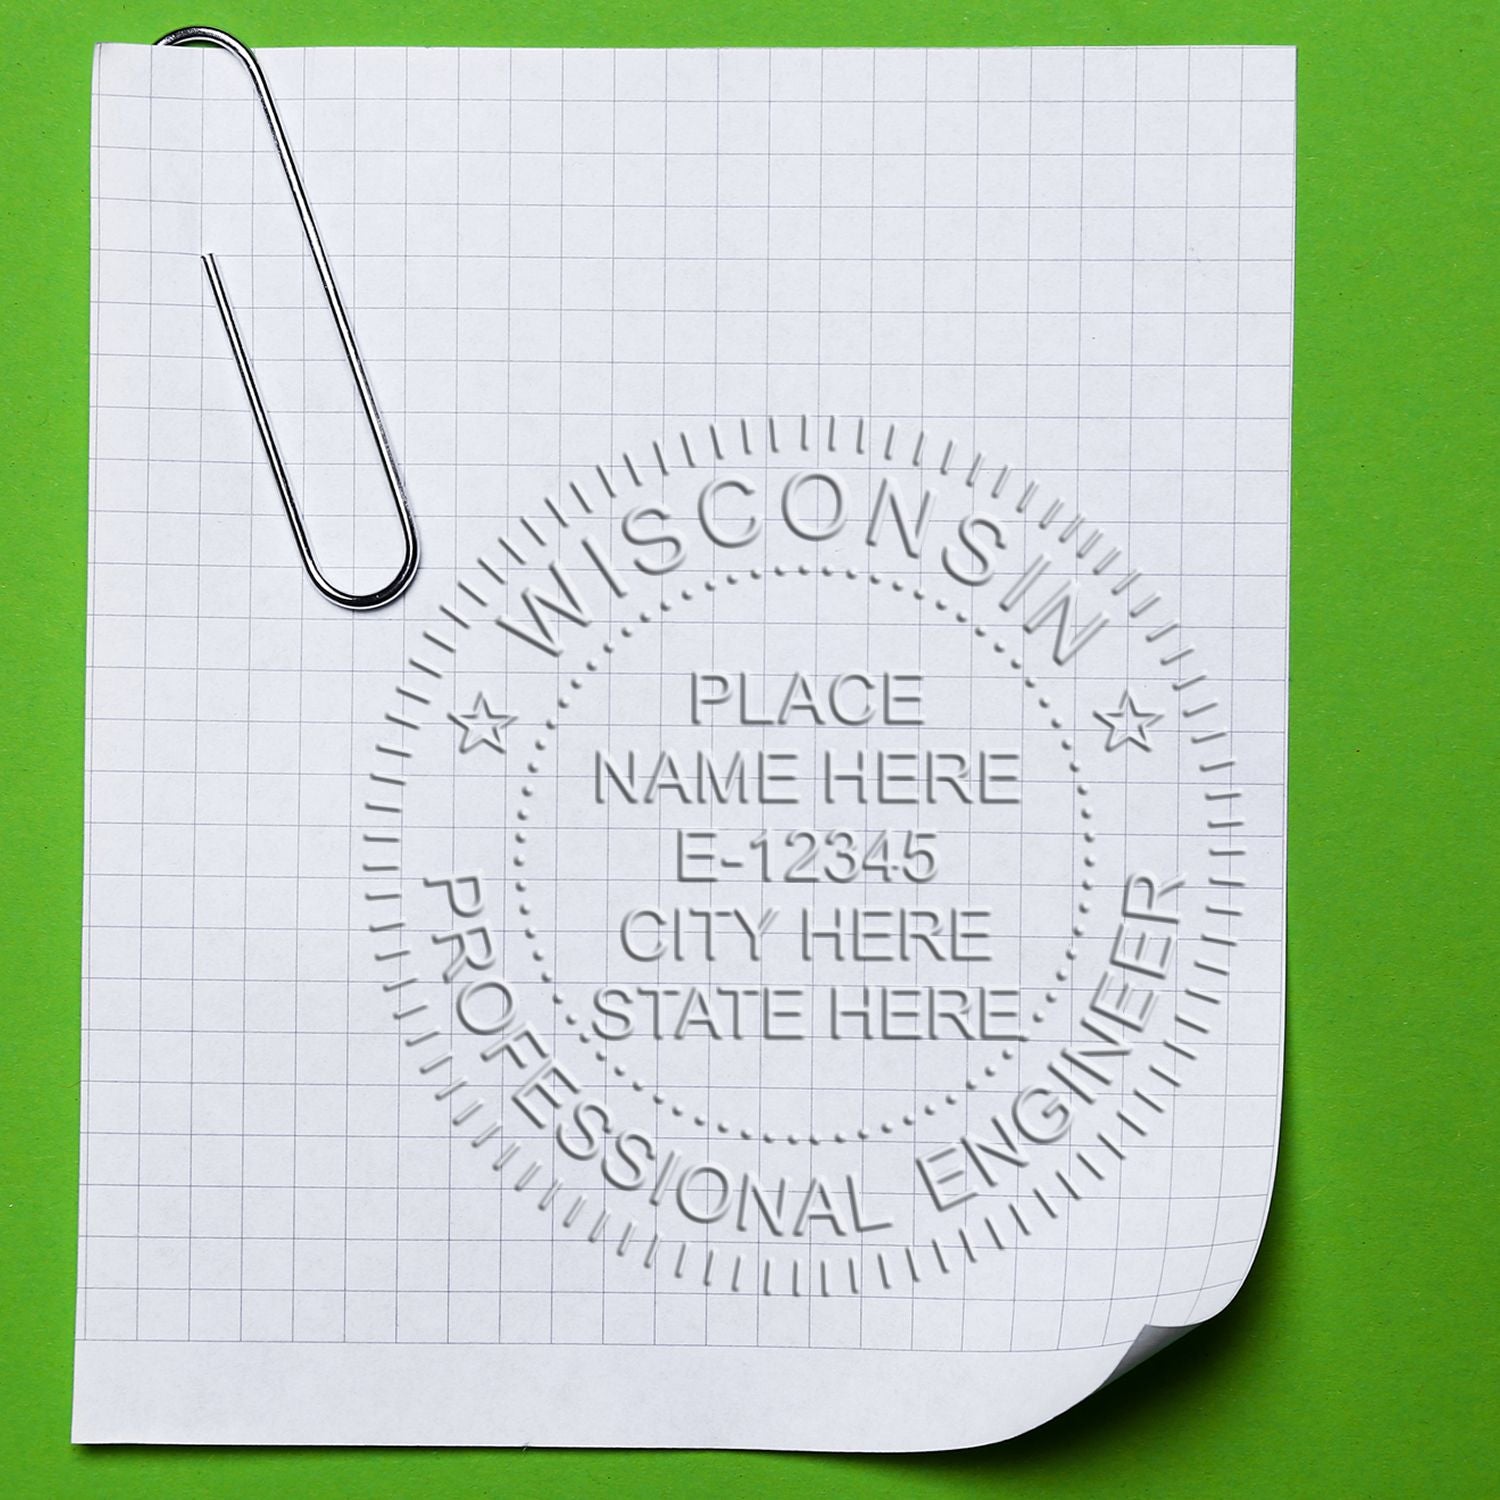 This paper is stamped with a sample imprint of the Wisconsin Engineer Desk Seal, signifying its quality and reliability.